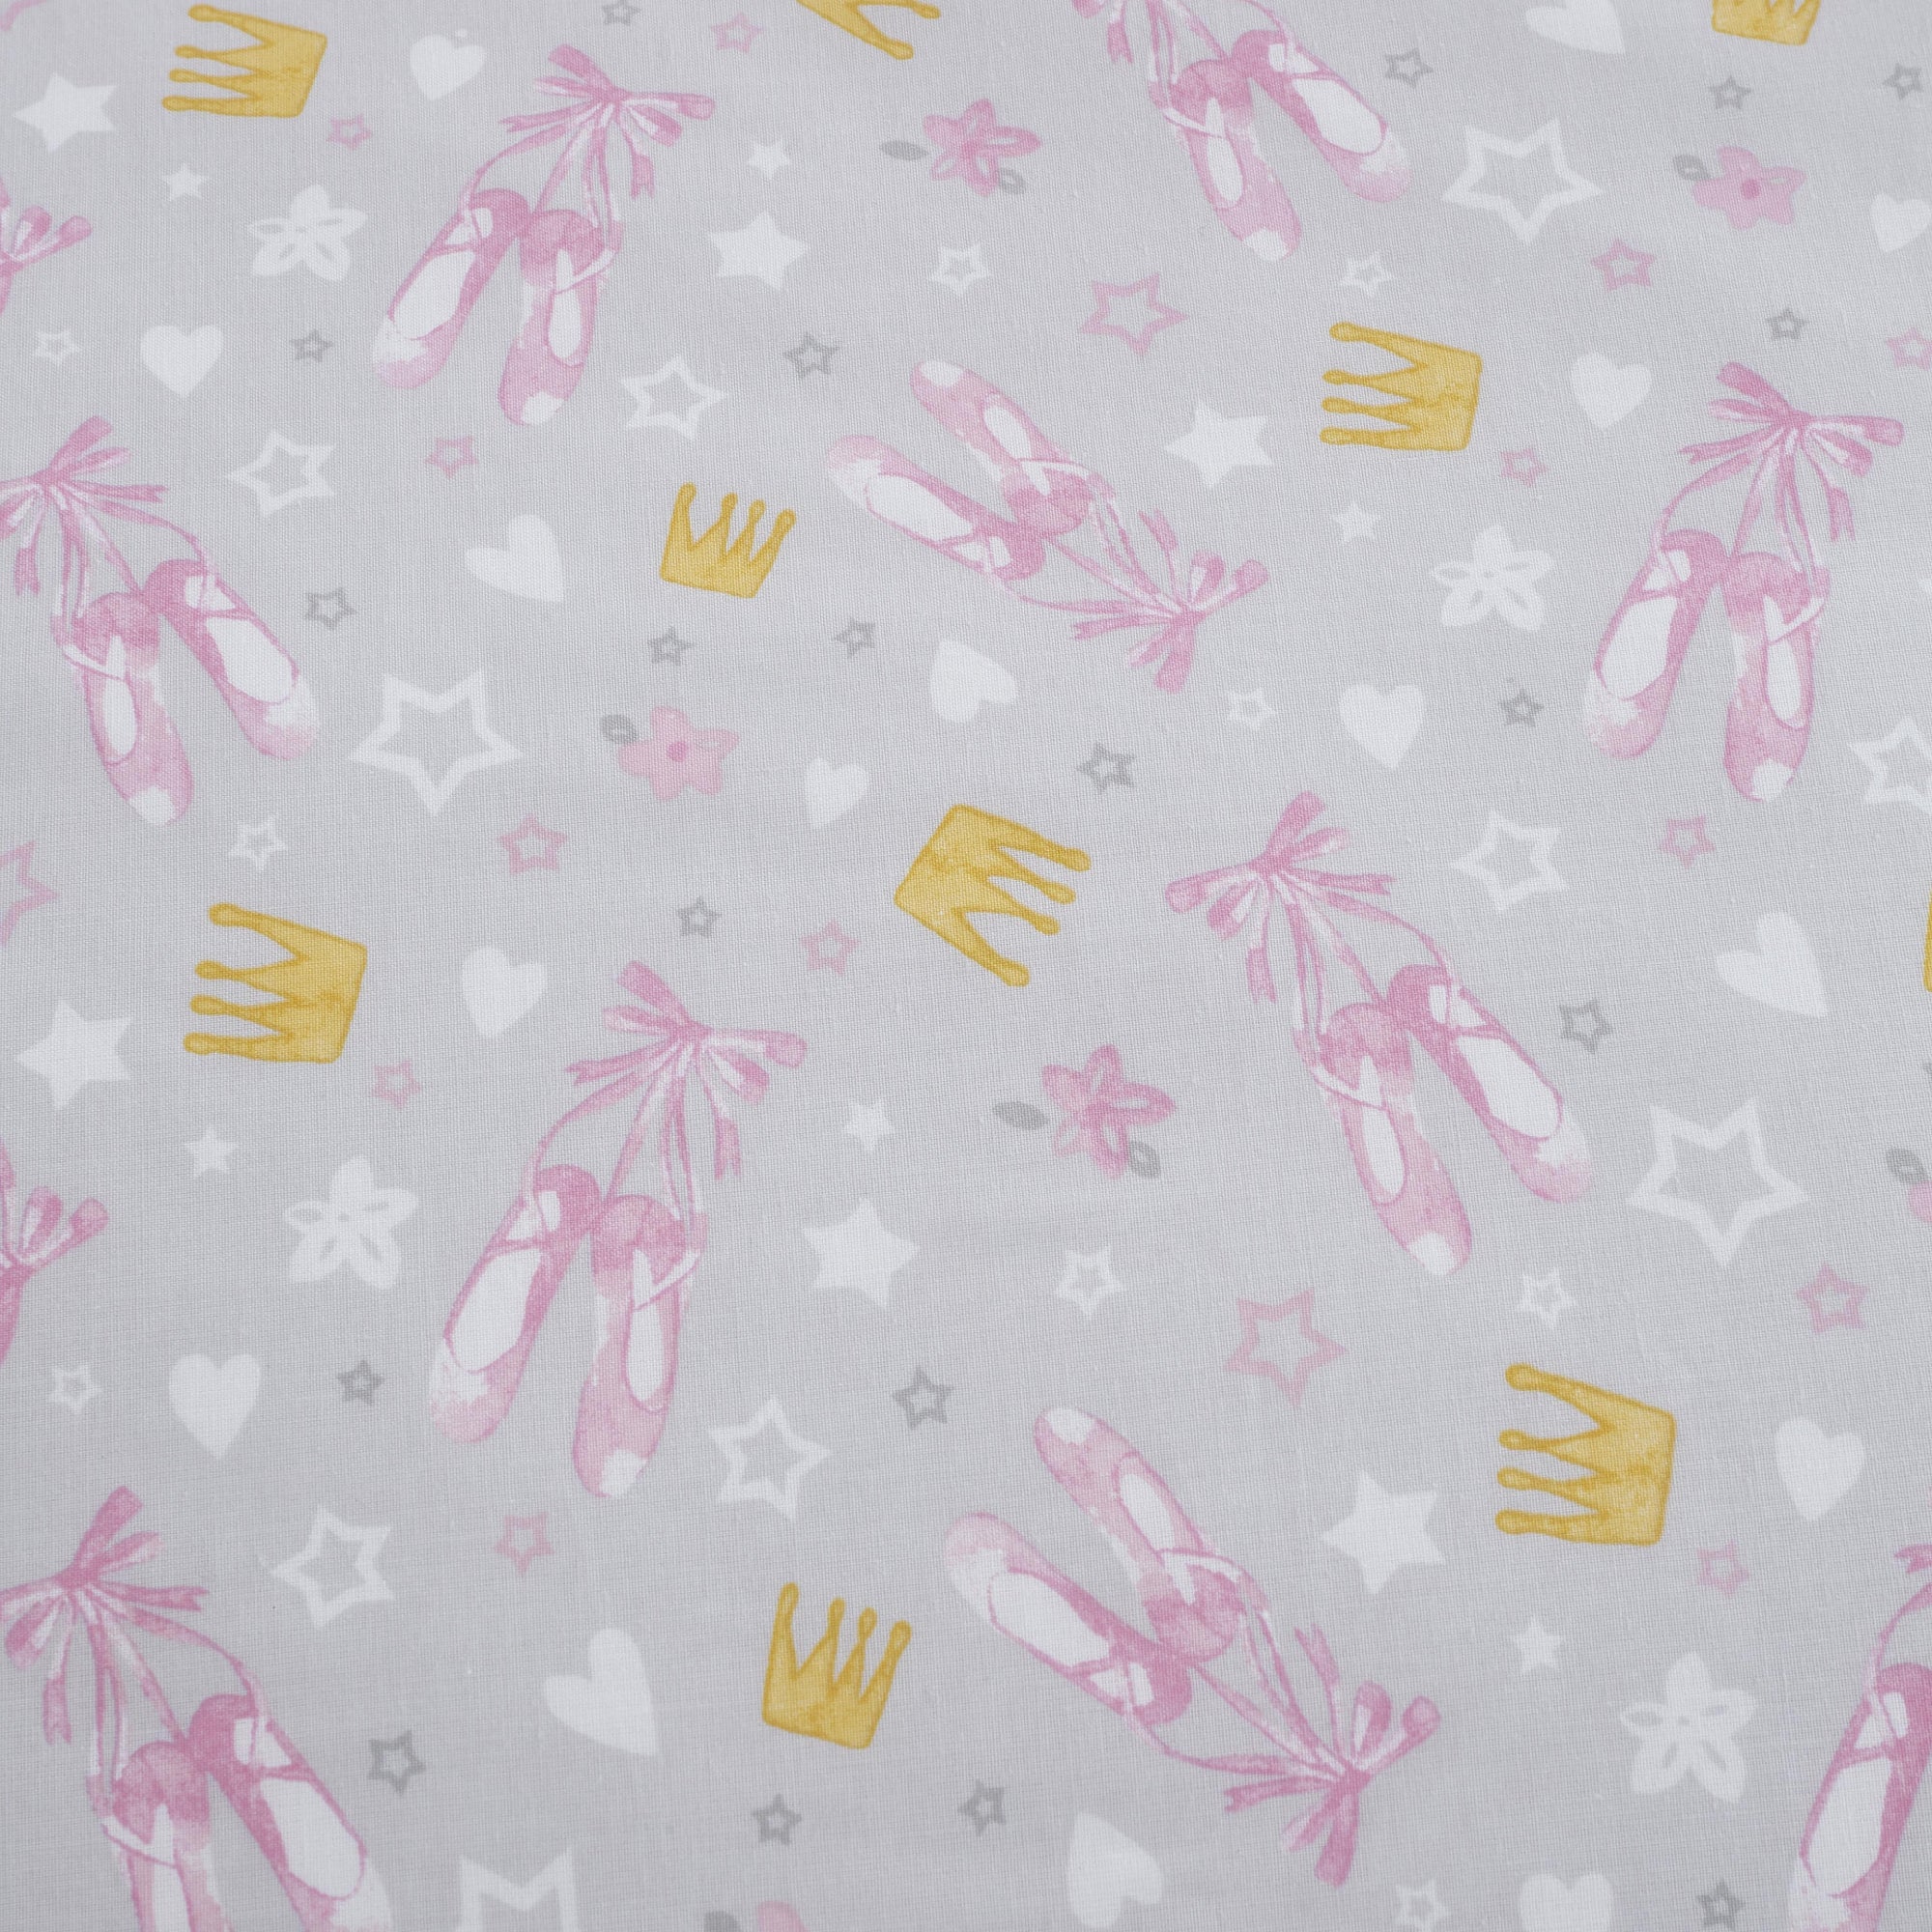 25cm Fitted Bed Sheet Ballet Dancer by Bedlam in Pink